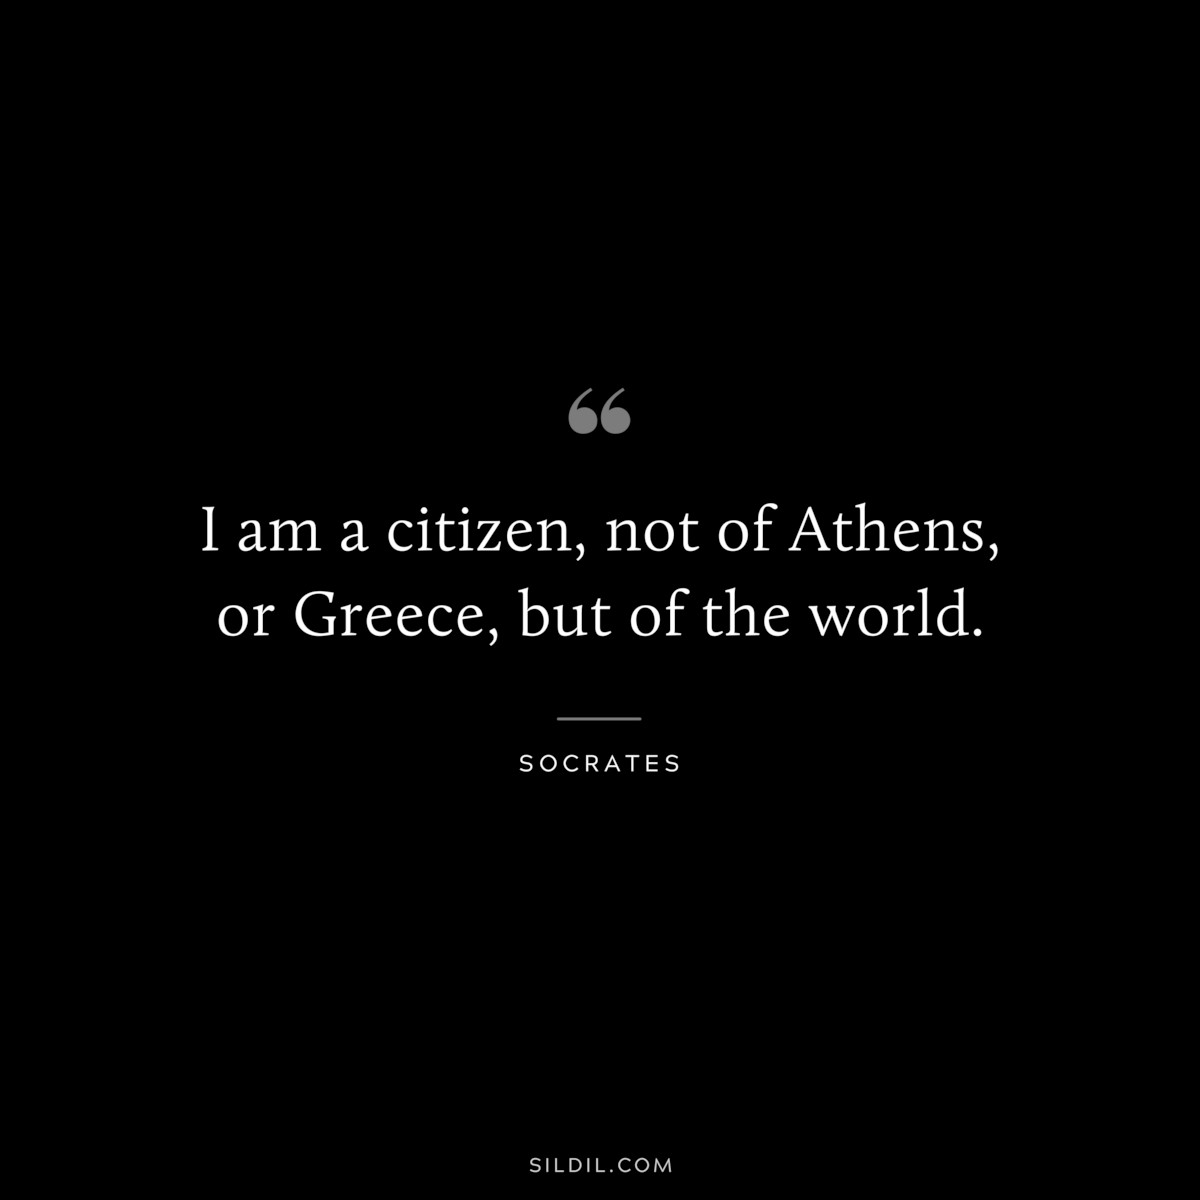 I am a citizen, not of Athens, or Greece, but of the world. ― Socrates